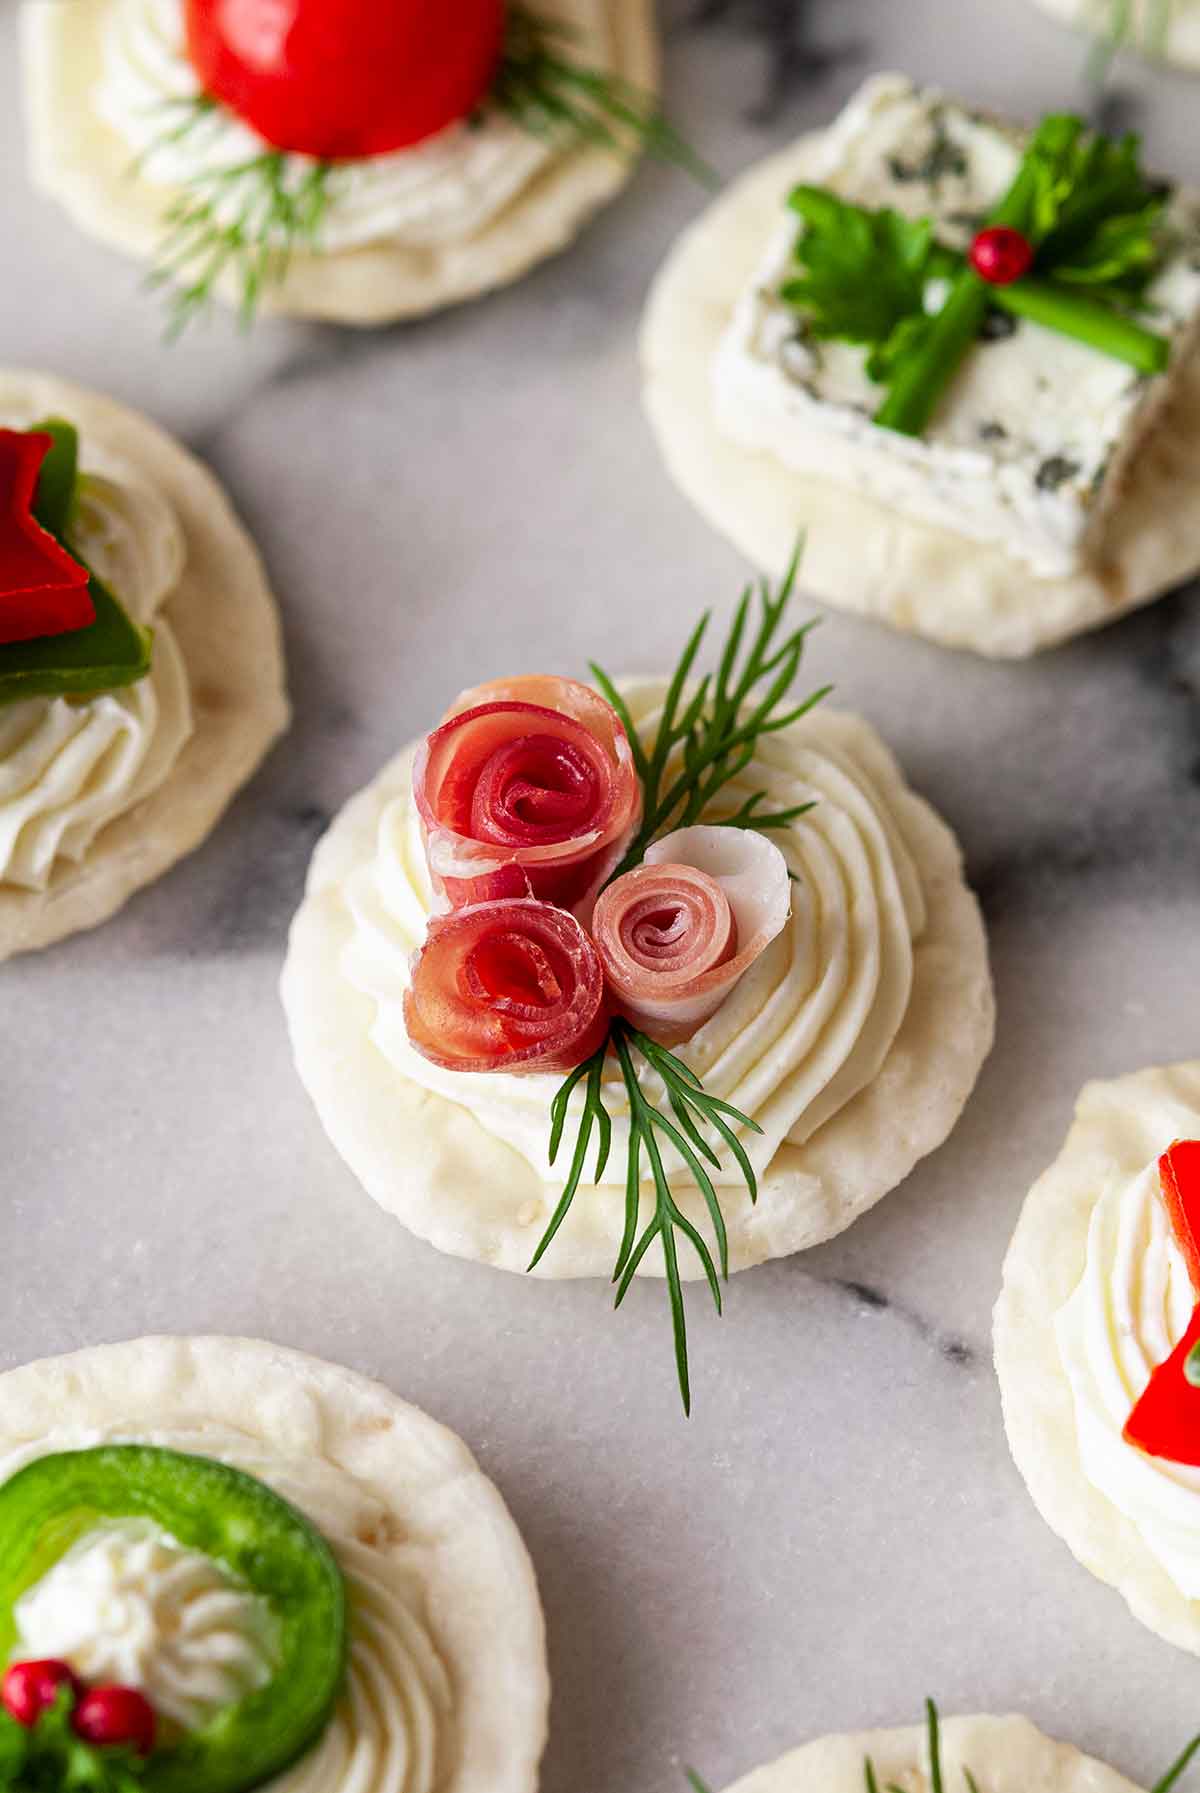 An appetizer with 3 prosciutto roses and dill beside 5 festive appetizers.